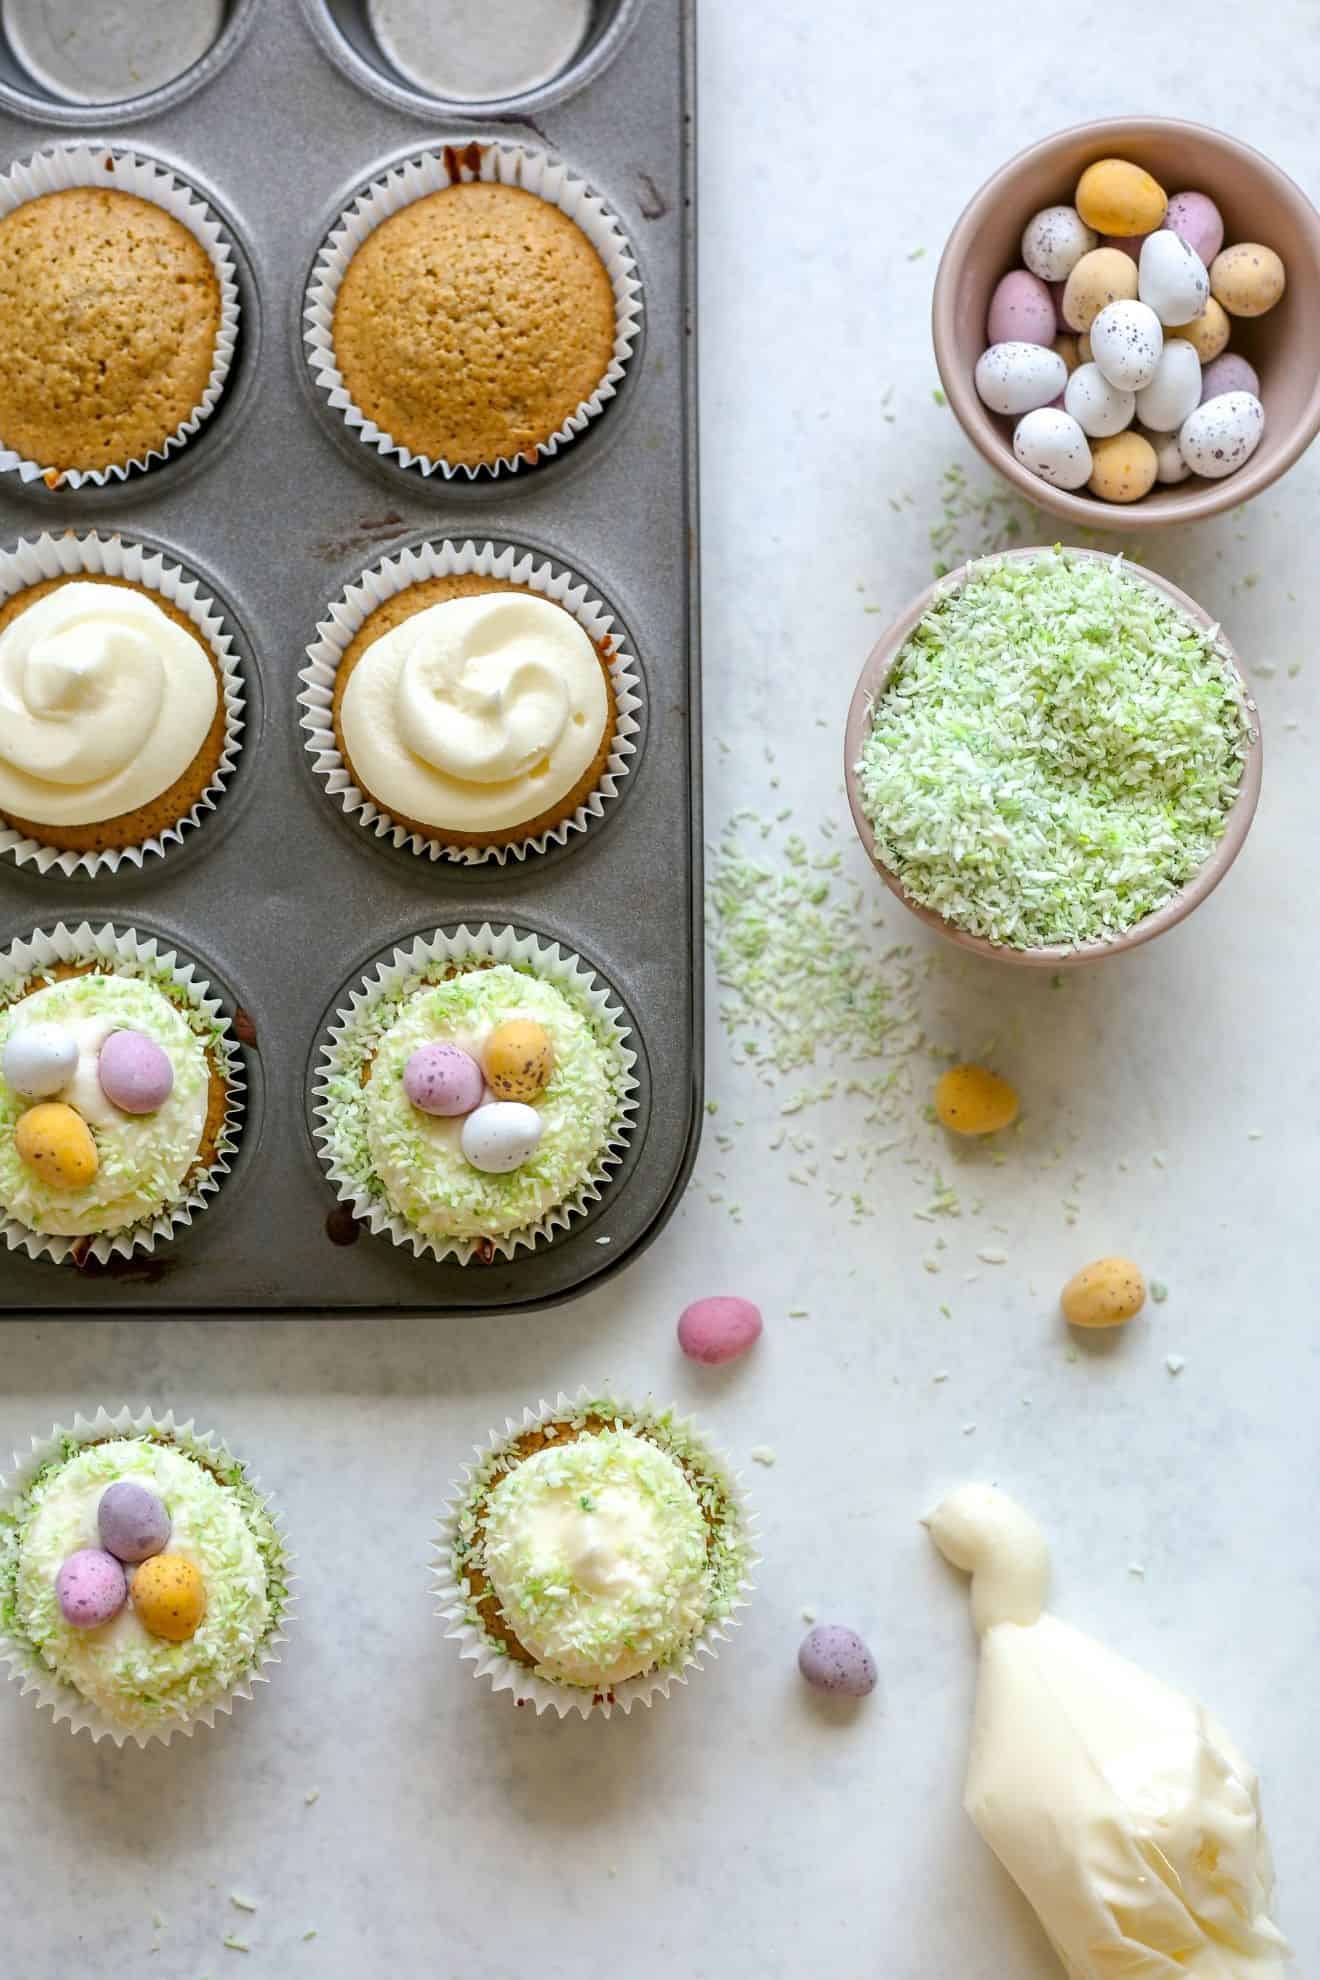 This is an overhead image of vanilla cupcakes. Some cupcakes are in the cupcake tin and some are on the white surface at the bottom of the image. The cupcakes are topped with vanilla frosting, sprinkled with green coconut and mini candy eggs. Next to the tin is a small bowl with candy eggs, and another bowl with light green colored coconut. To the bottom right of the image is a plastic piping baggie with vanilla frosting.